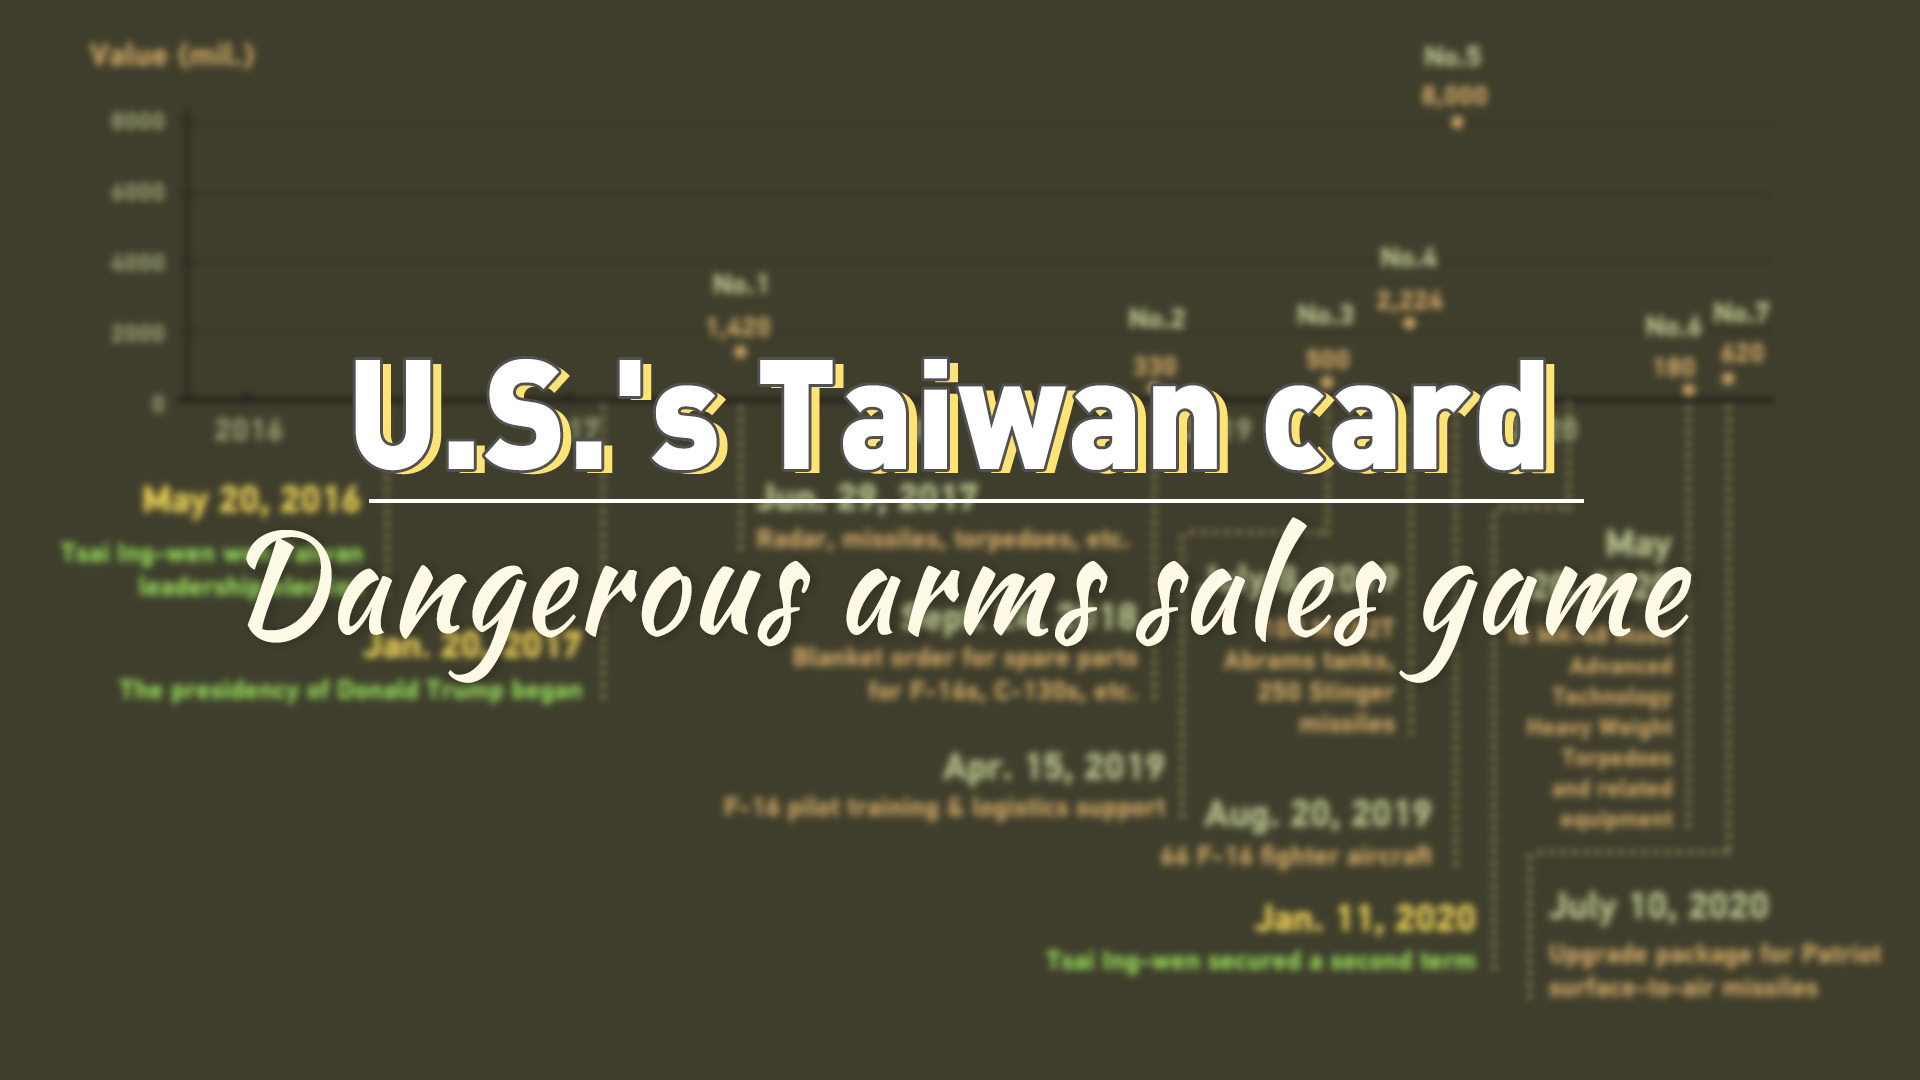 U.S. and Taiwan: A dangerous arms sales game